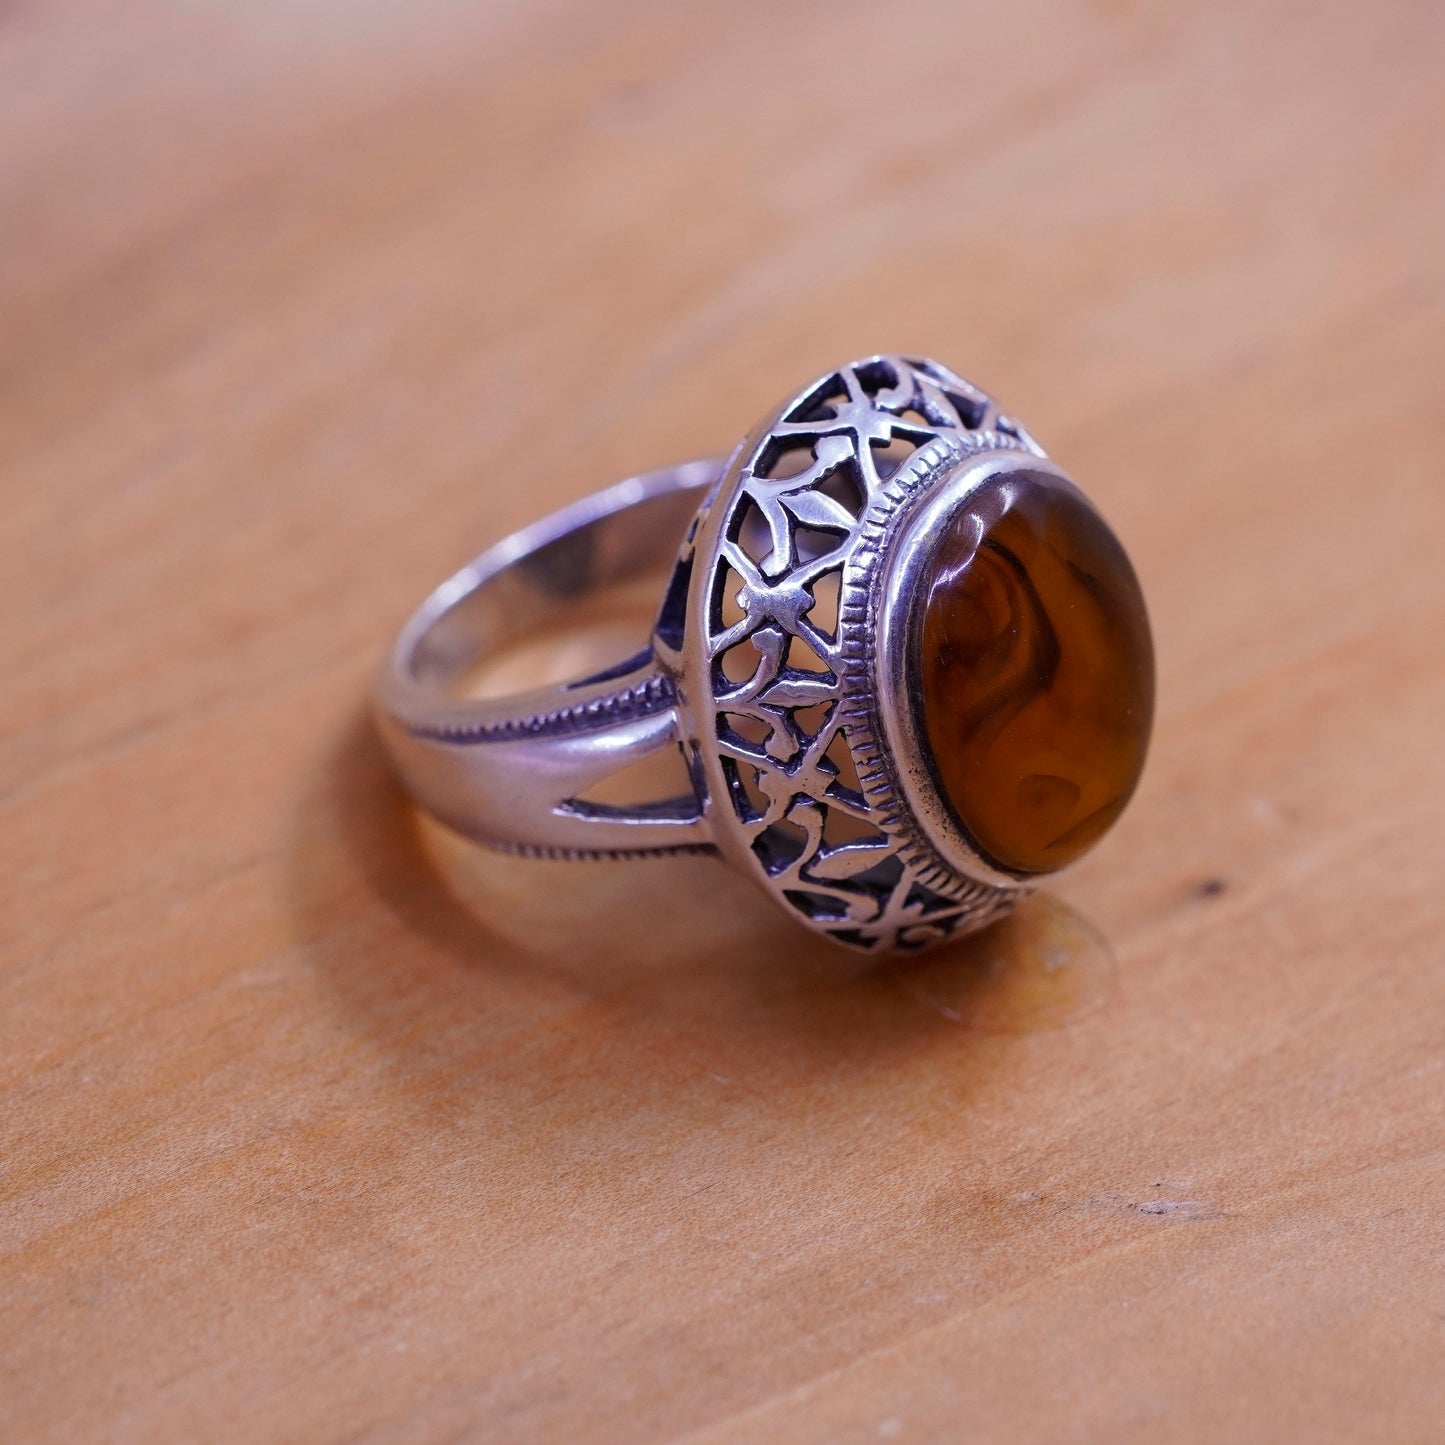 Size 6.25, vintage Sterling 925 silver handmade filigree ring with oval Amber